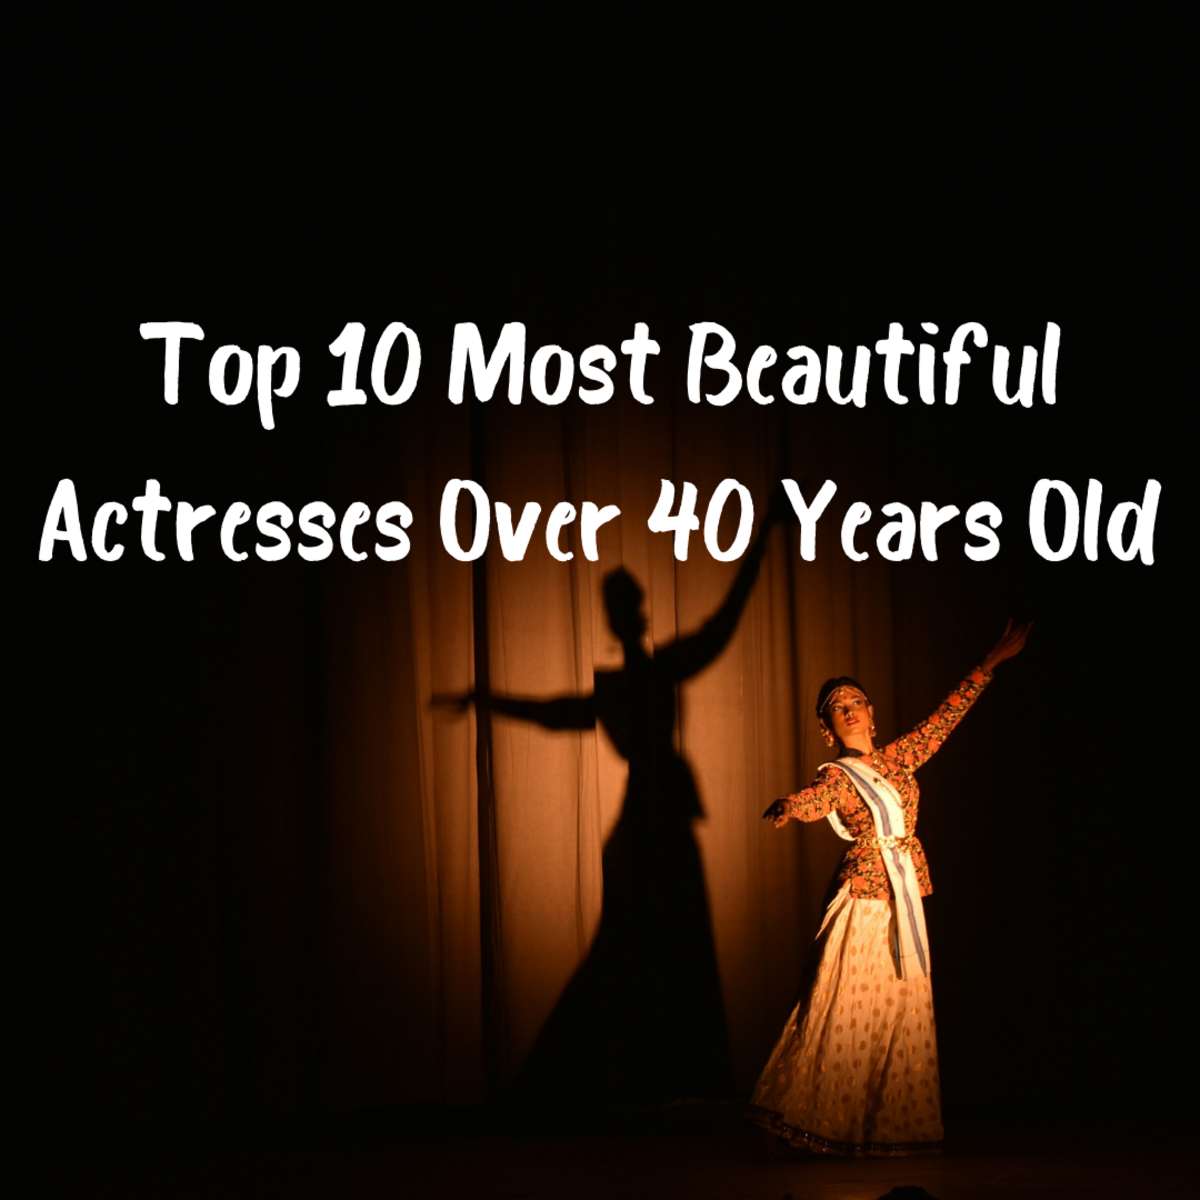 Top 10 Most Beautiful Actresses Over 40 Years Old